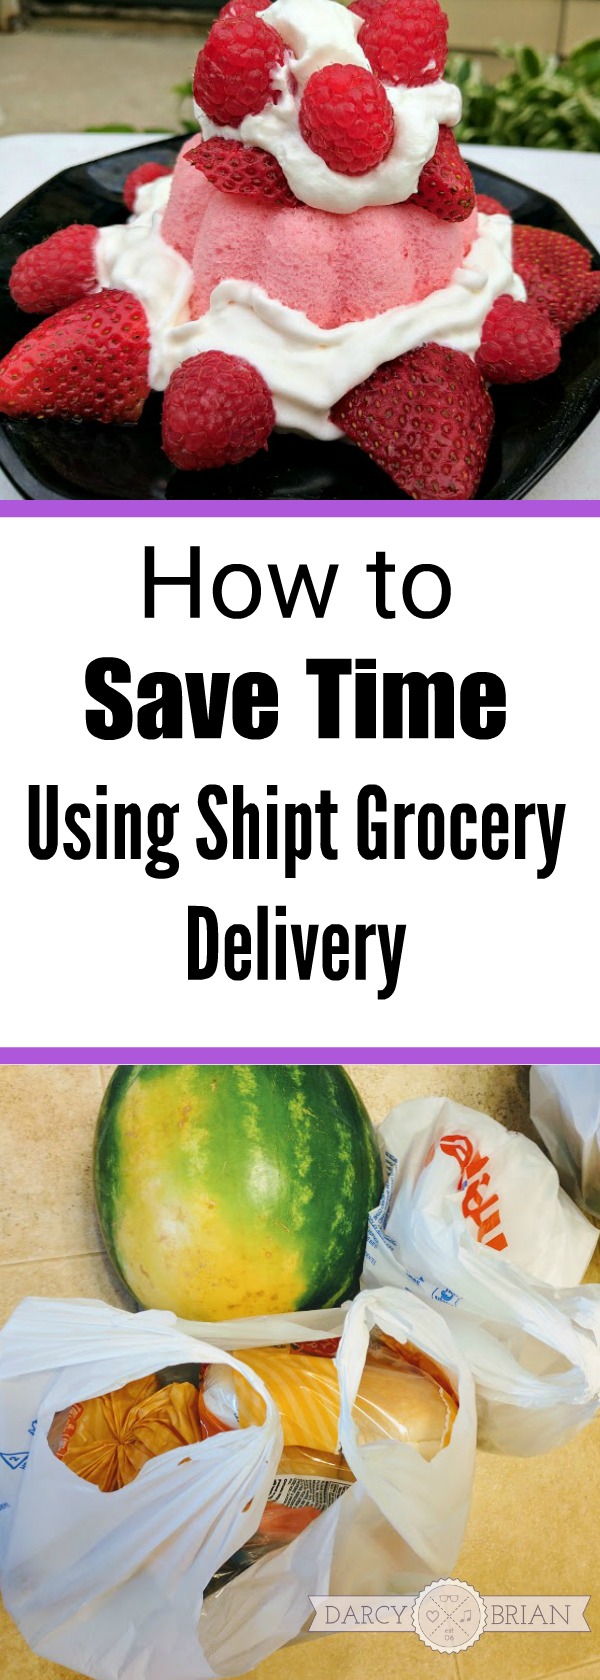 Sponsored: Looking for an easy to use grocery delivery service? Check out our thoughts on using the Shipt app for ordering groceries from Meijer in the Milwaukee area.